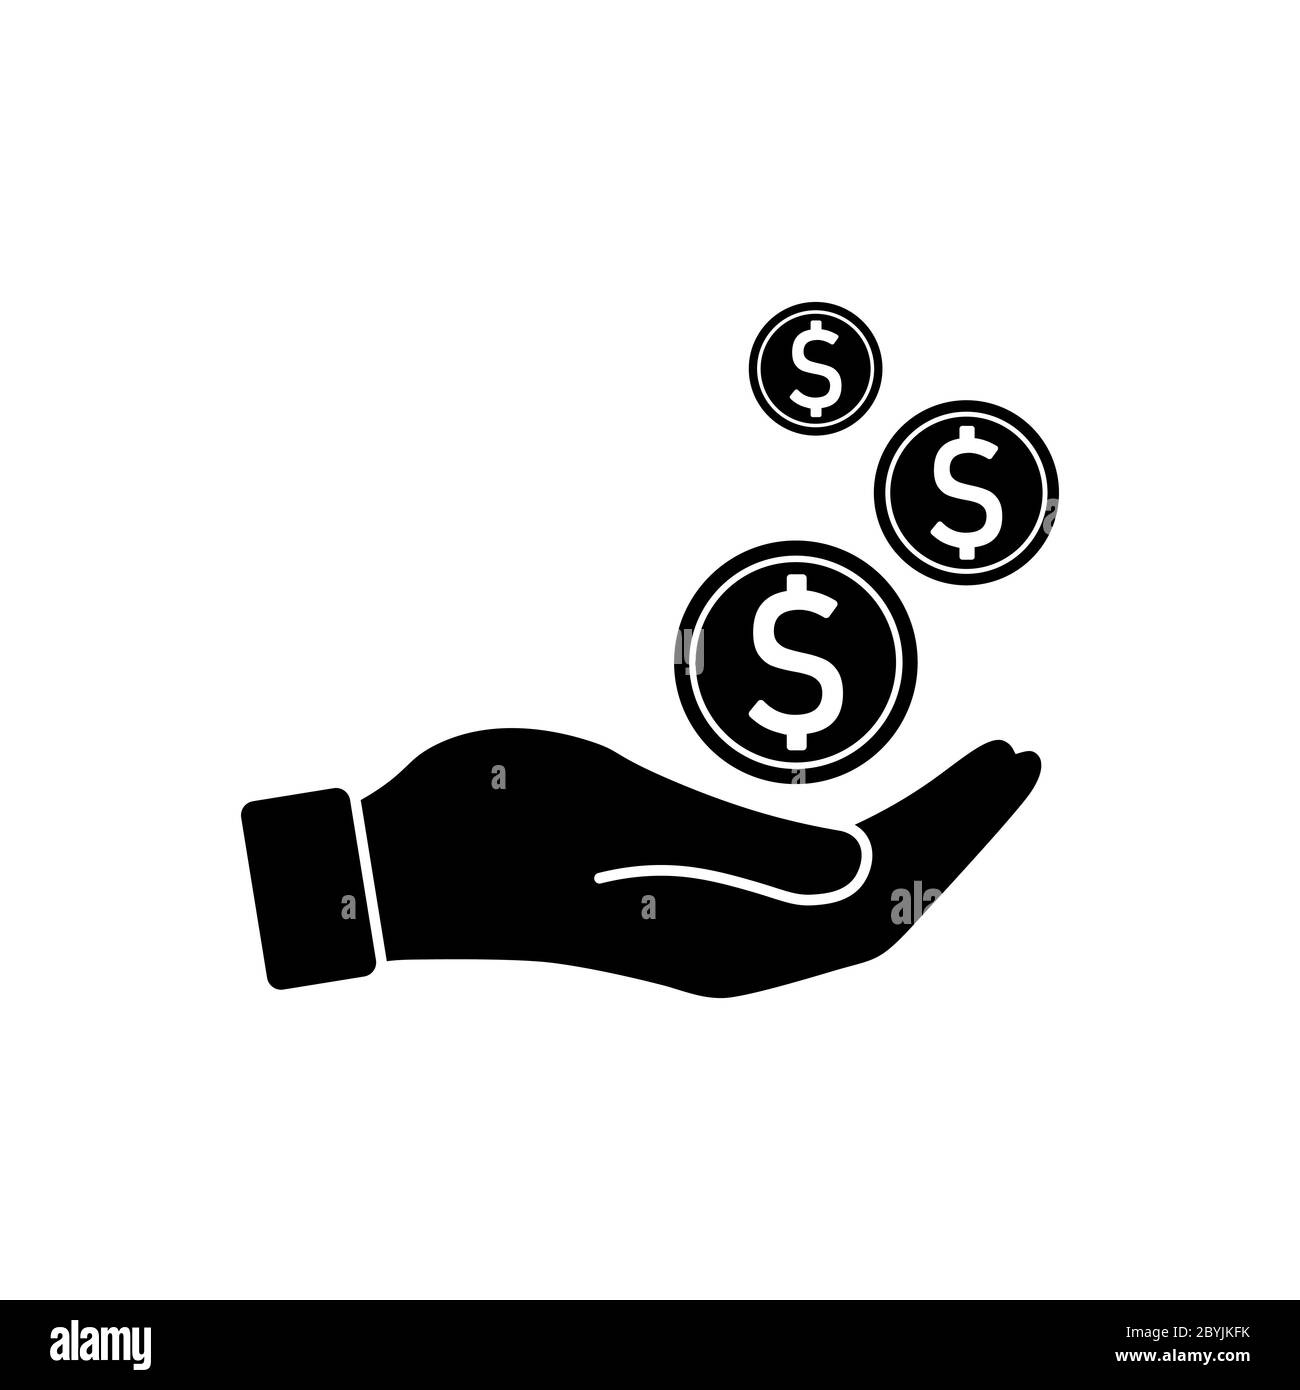 Hands are holding money, banknote or dollar bill icon flat logo in white on isolated black background. EPS 10 vector. Stock Vector